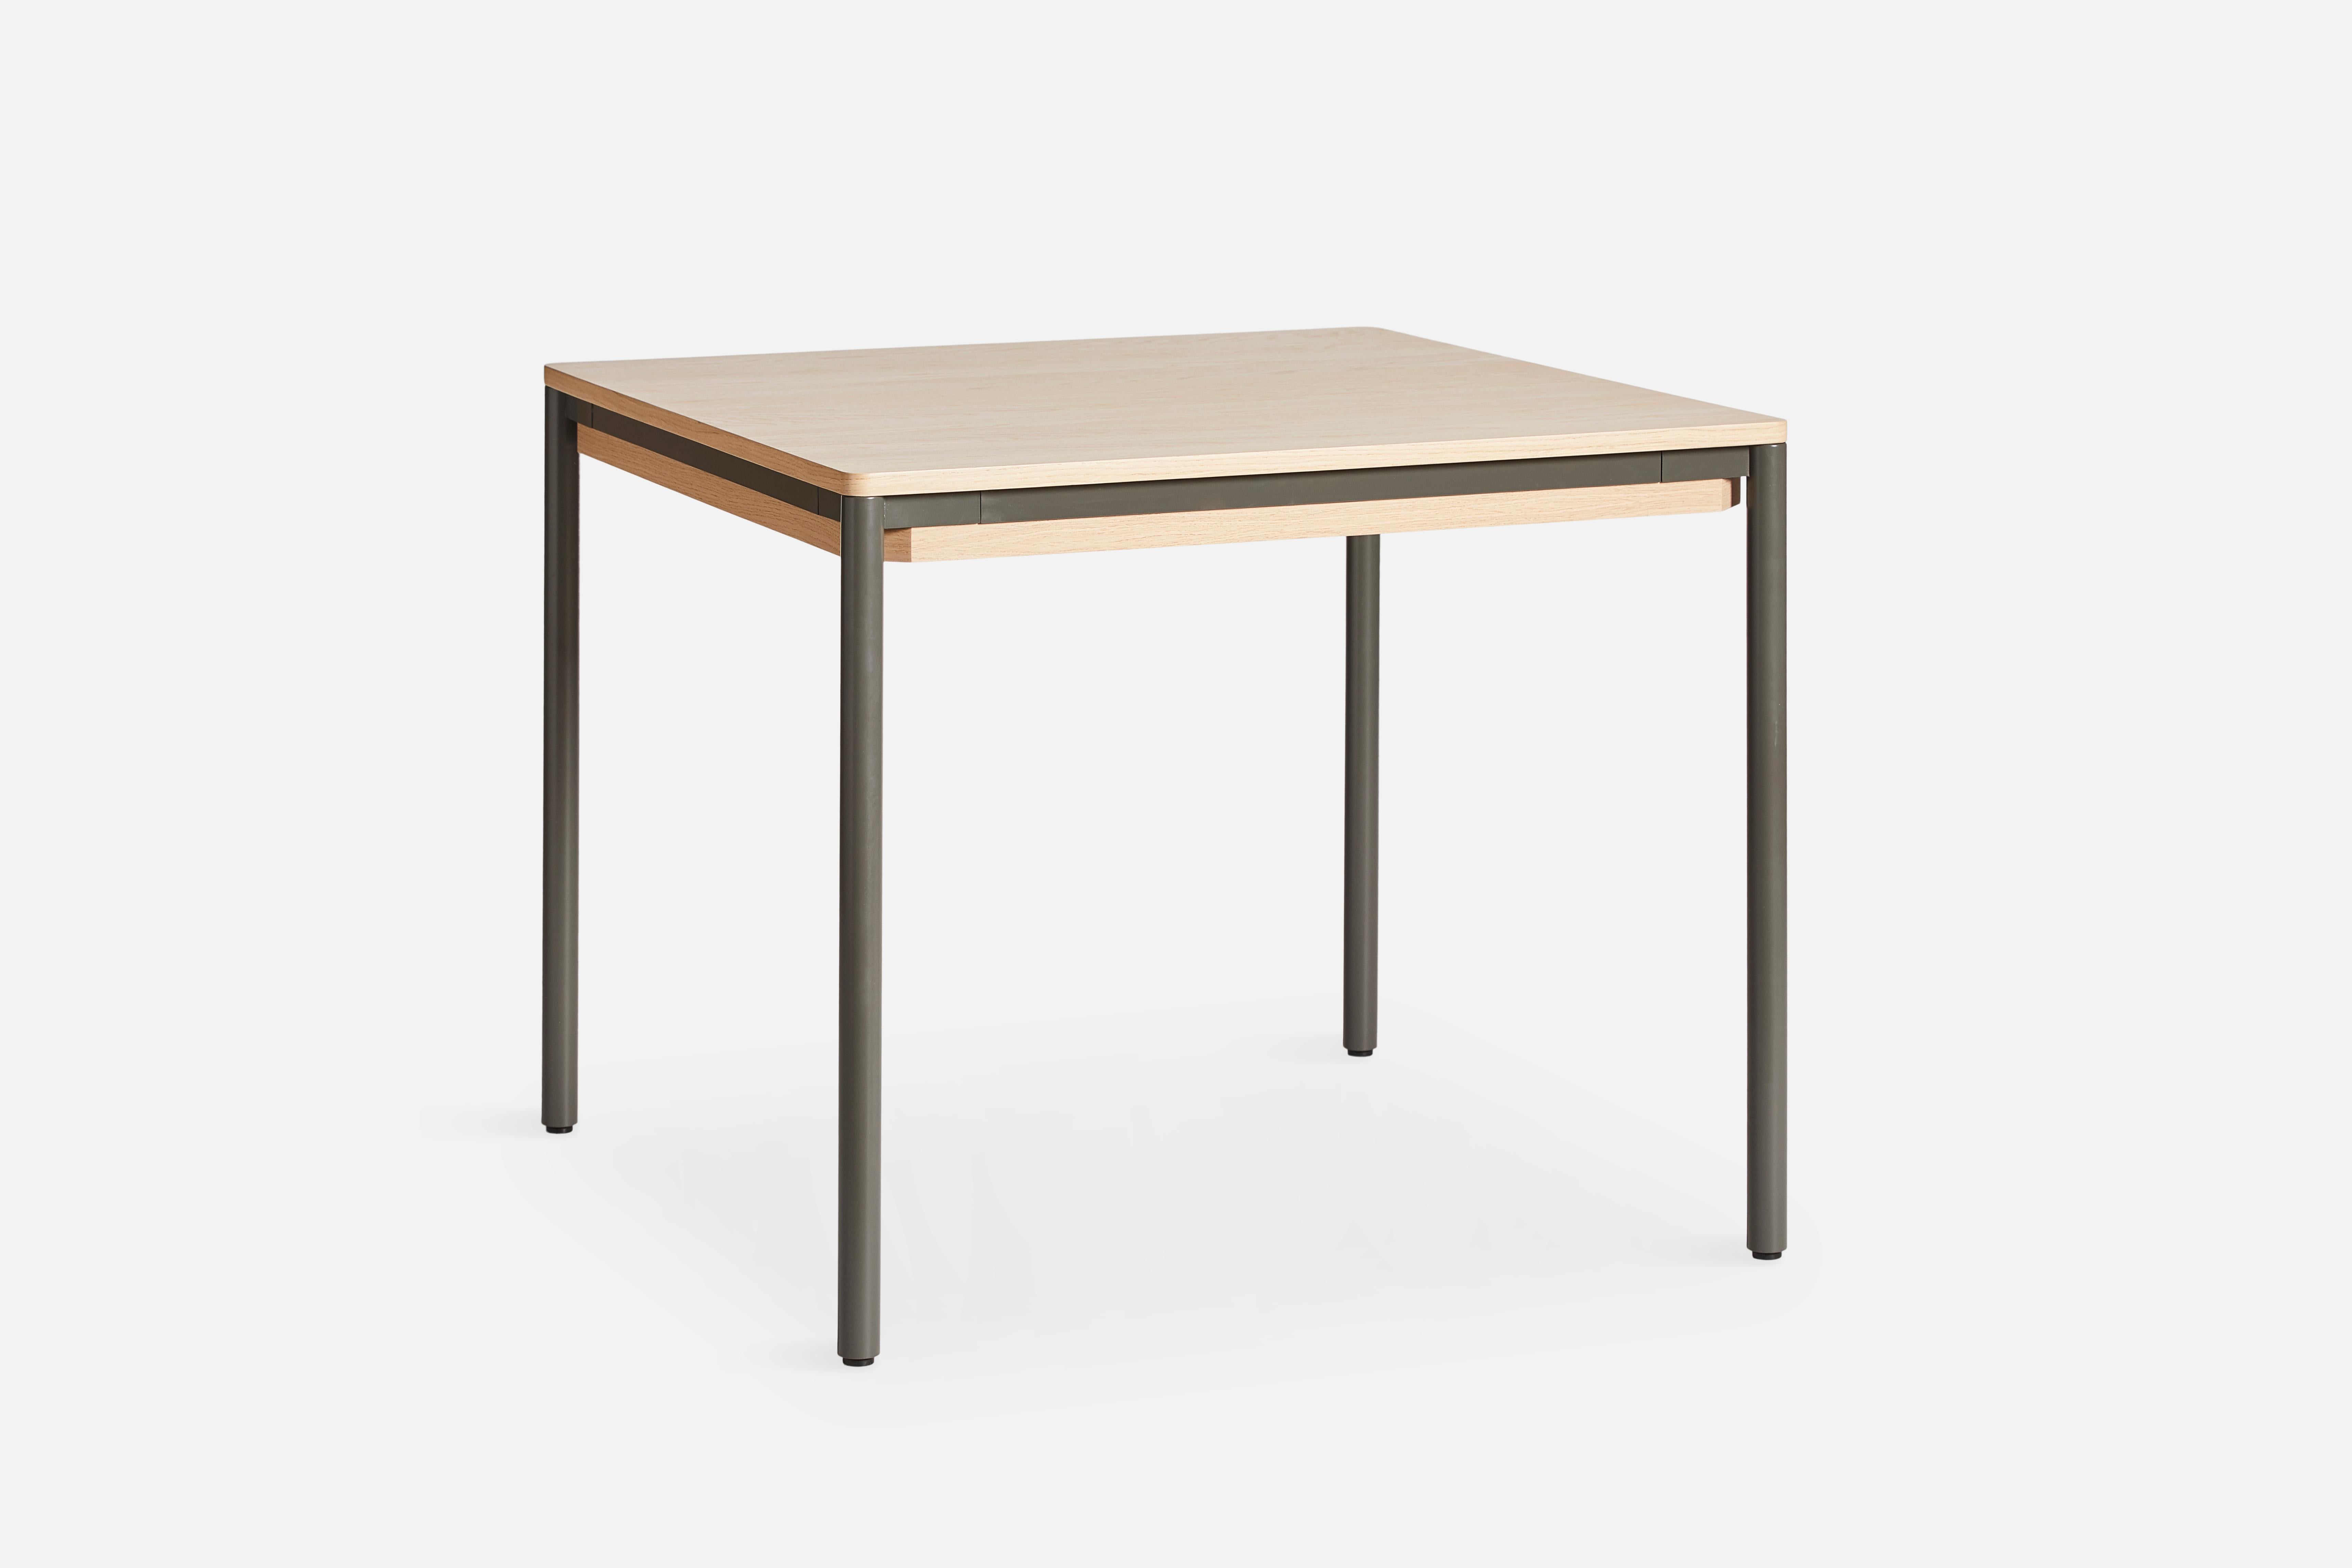 Piezas Small Dining Table by Silvia Ceñal
Materials: Lacquer, Oak, metal.
Dimensions: D 85 x W 85 x H 74 cm
Also available in different sizes. Please contact us. 

The founders, Mia and Torben Koed, decided to put their 30 years of experience